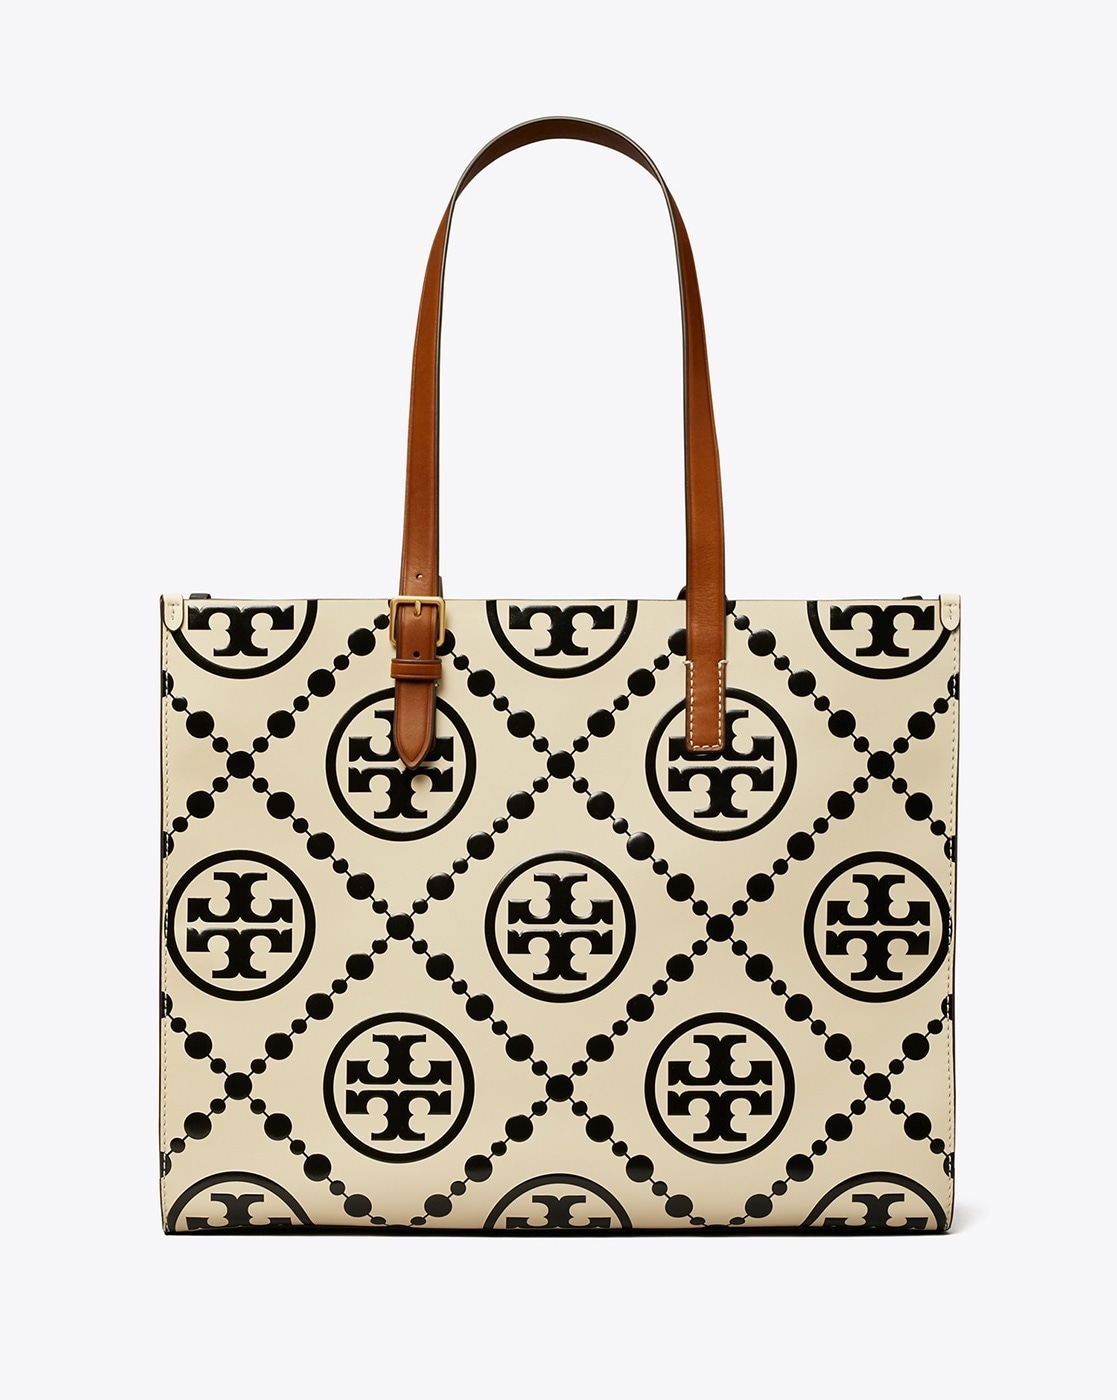 Tory Burch T Monogram Coated Canvas Tote Bag 💰Small- RM600 Large- RM620  Depo RM300